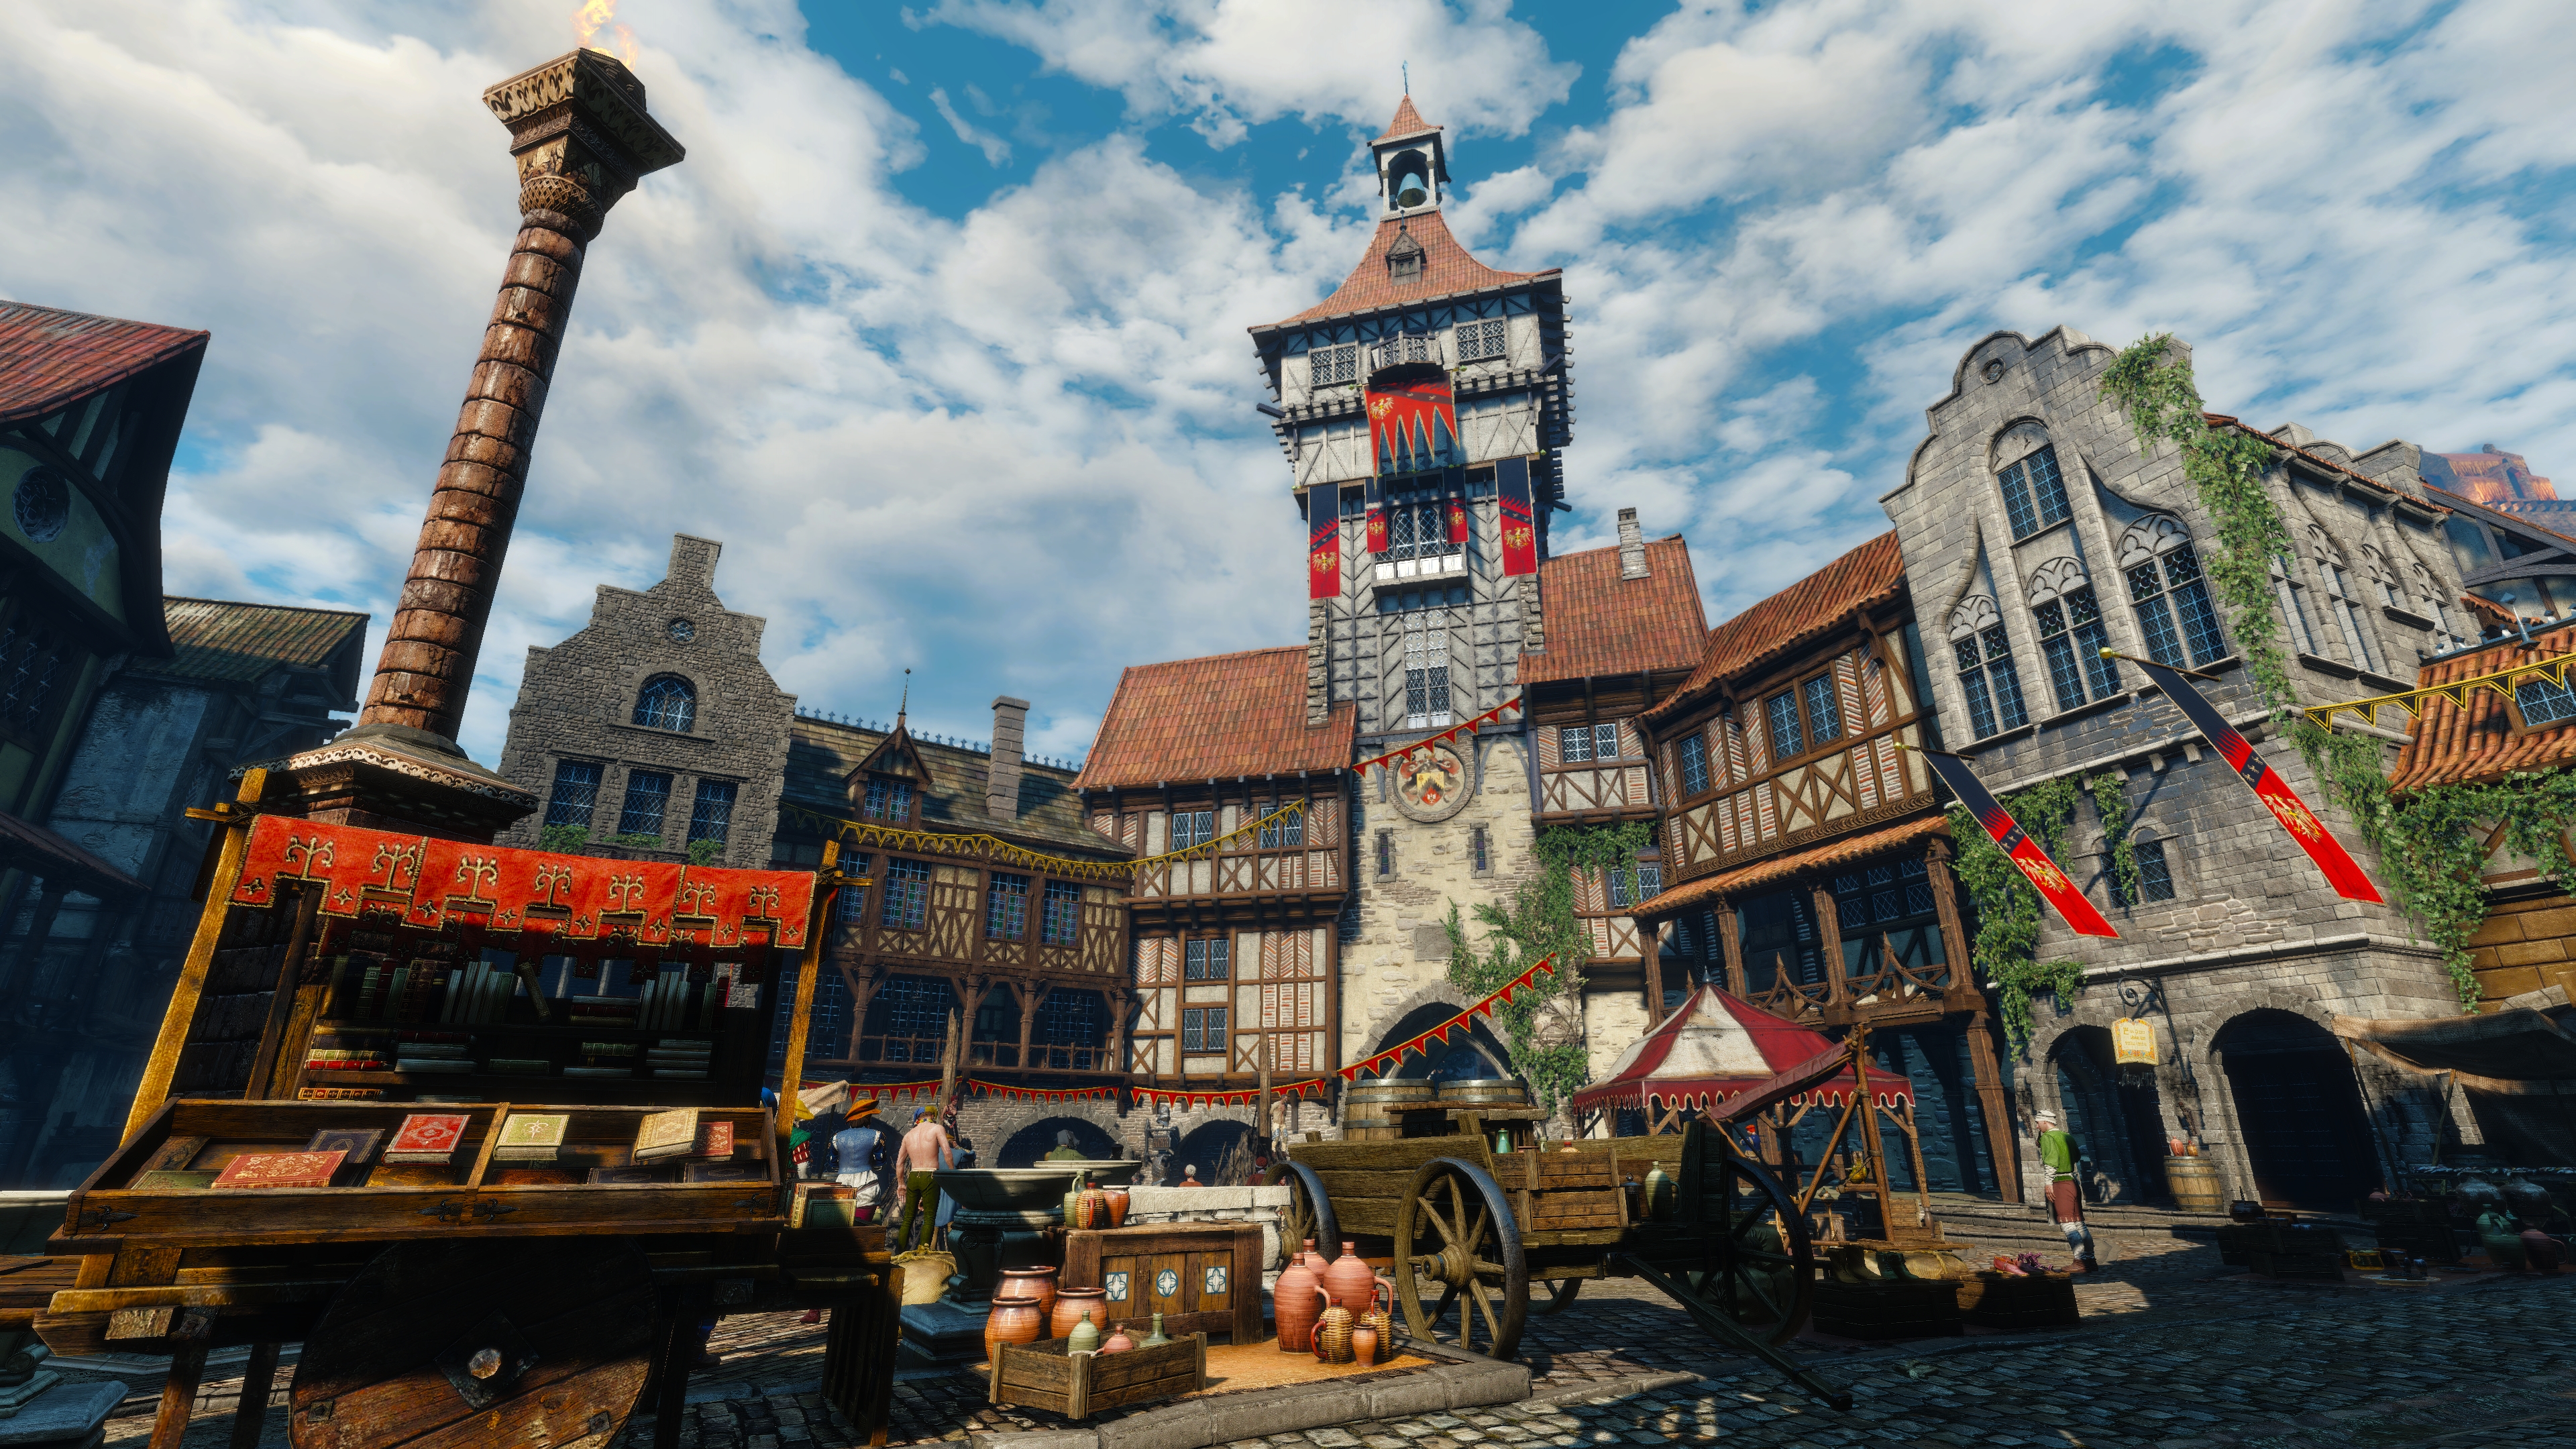 General 3840x2160 The Witcher 3: Wild Hunt screen shot PC gaming Novigrad video game art video games building sky clouds sunlight architecture flag people books CGI